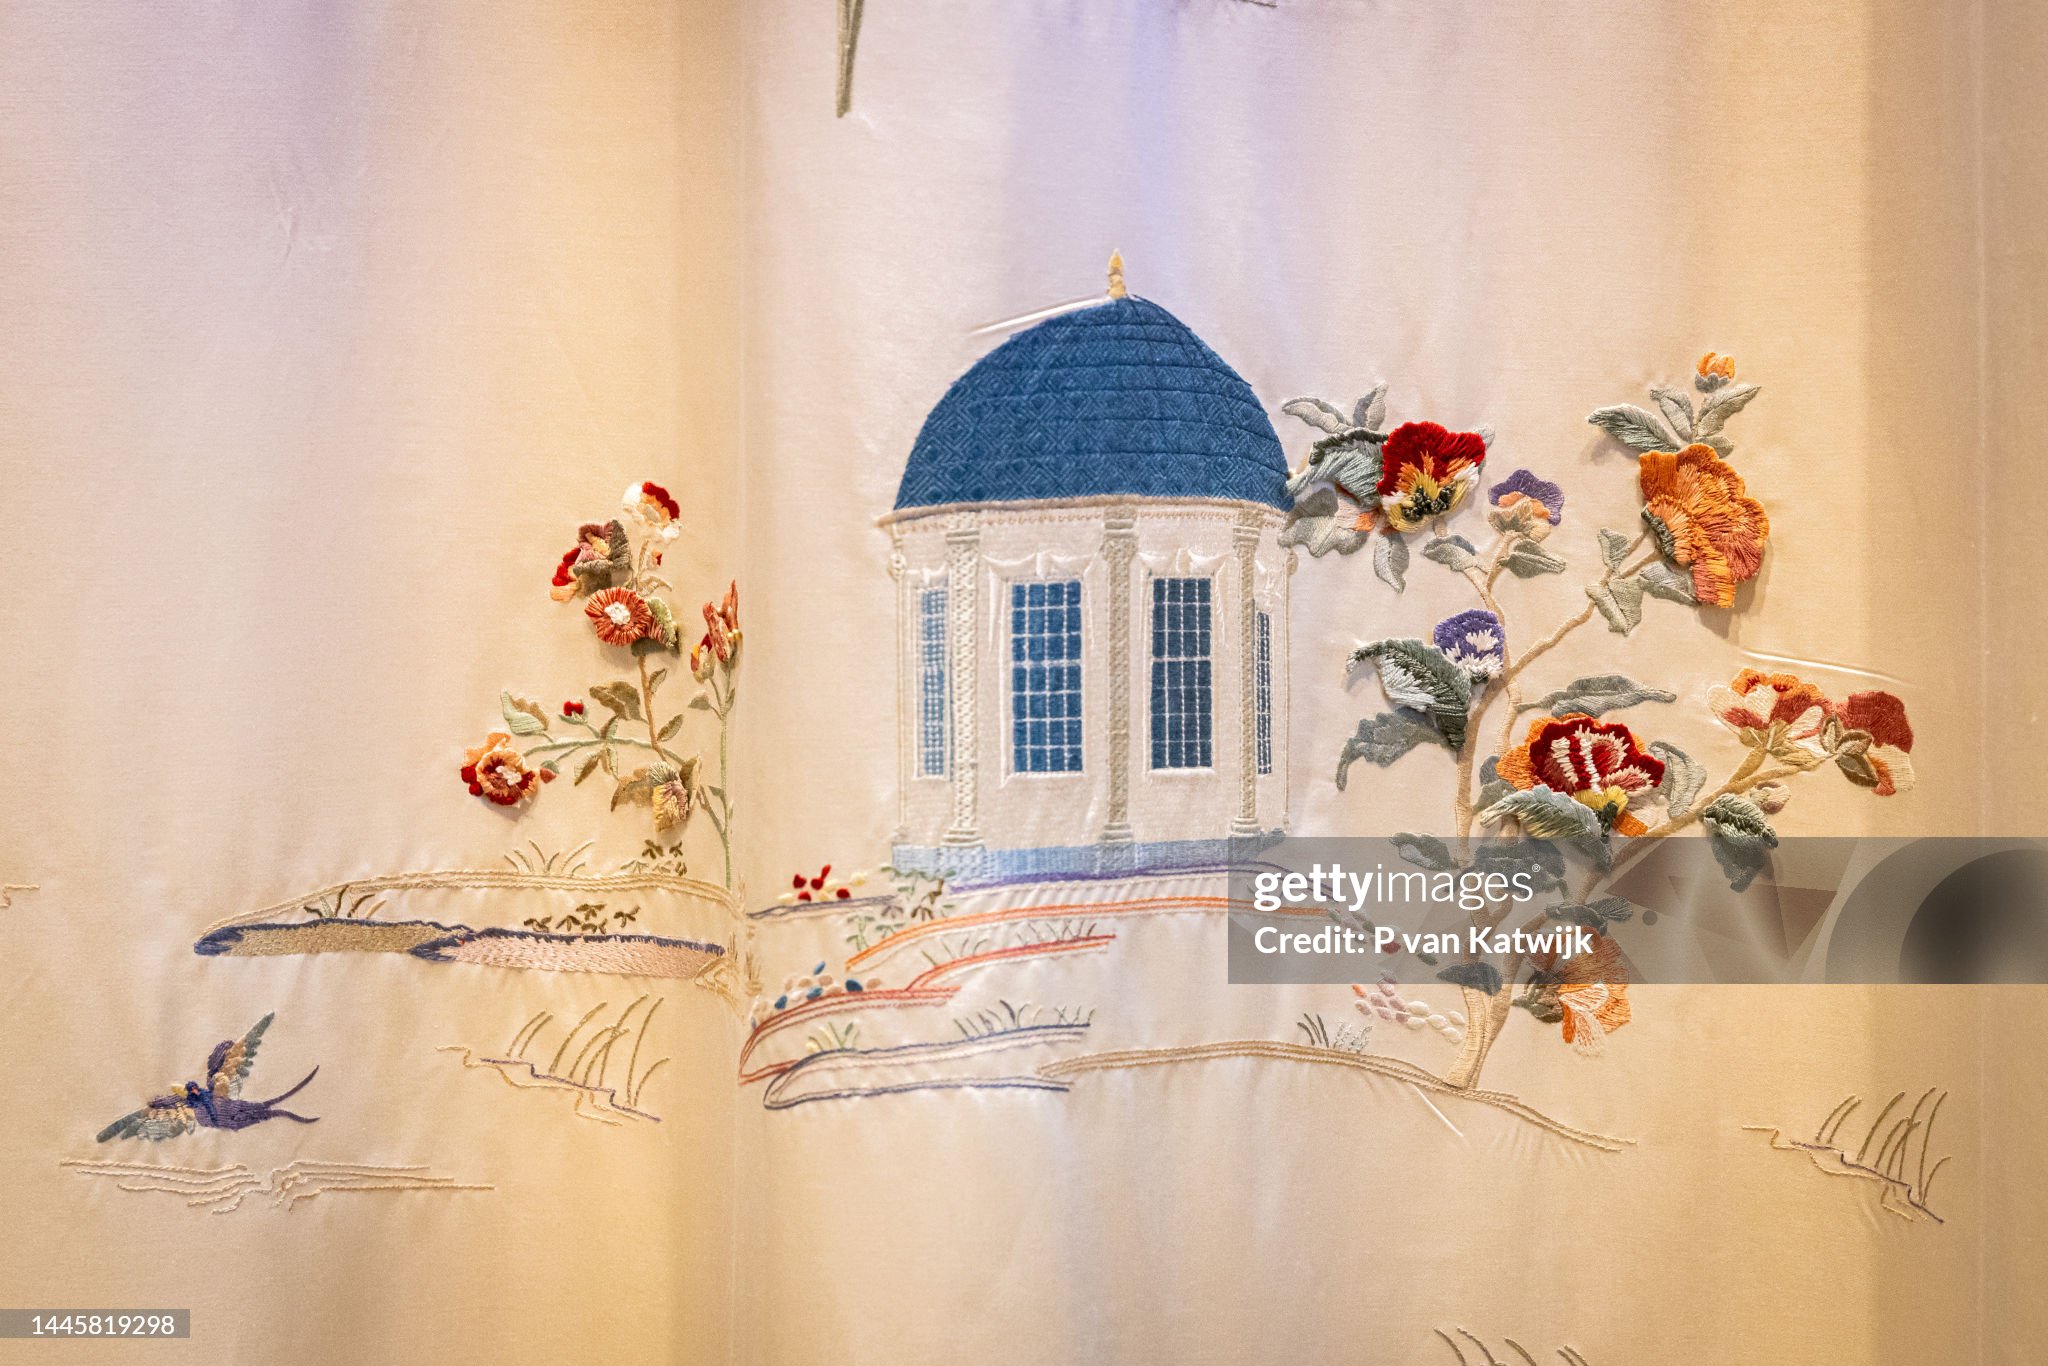 queen-maxima-of-the-netherlands-visits-textile-museum-to-present-her-new-curtains-for-palace.jpg?s=2048x2048&w=gi&k=20&c=m6euylvxd7p7u4hdtdF20RpcDMEISJ1n-v8Zx2FSINQ=